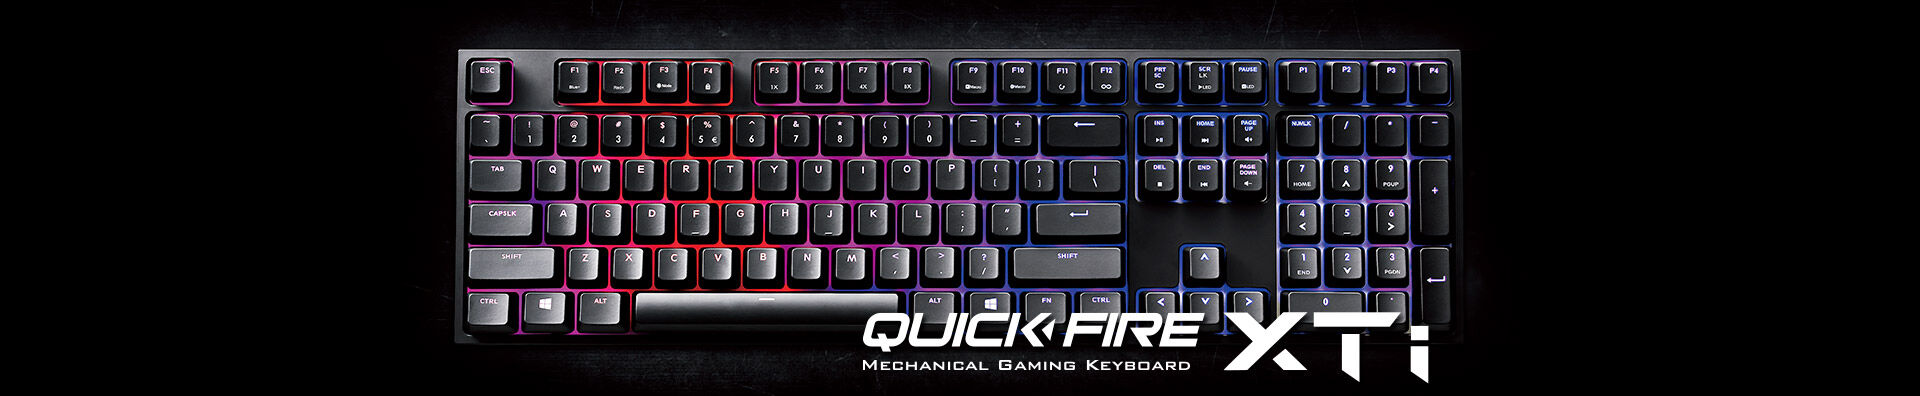 CoolerMaster Quick Fire XTi launched 20